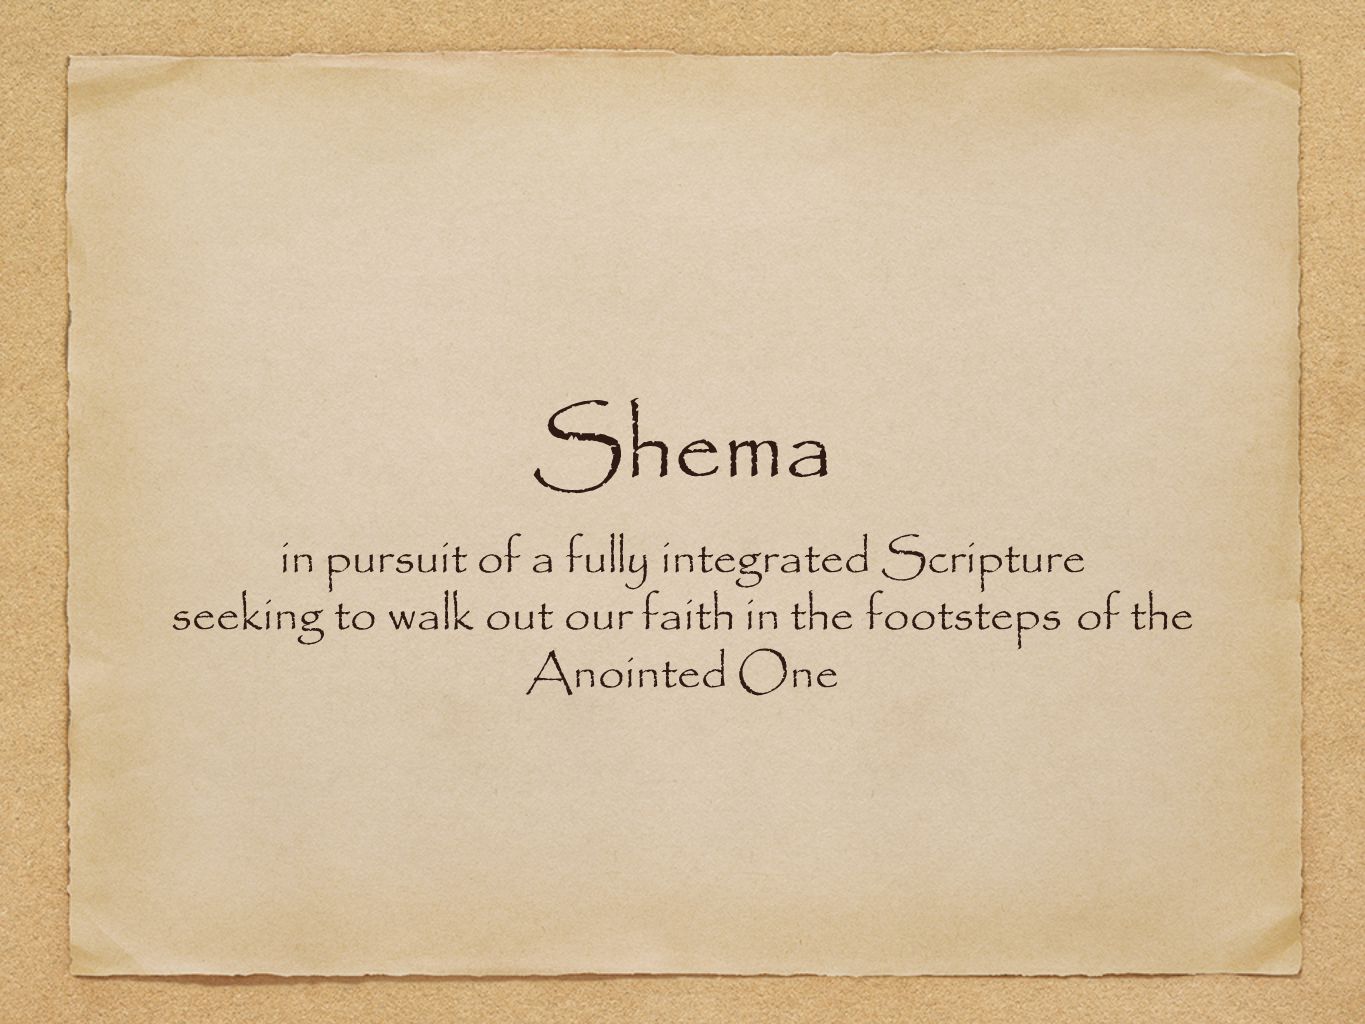 Shema in pursuit of a fully integrated Scripture seeking to walk out our faith in the footsteps of the Anointed One